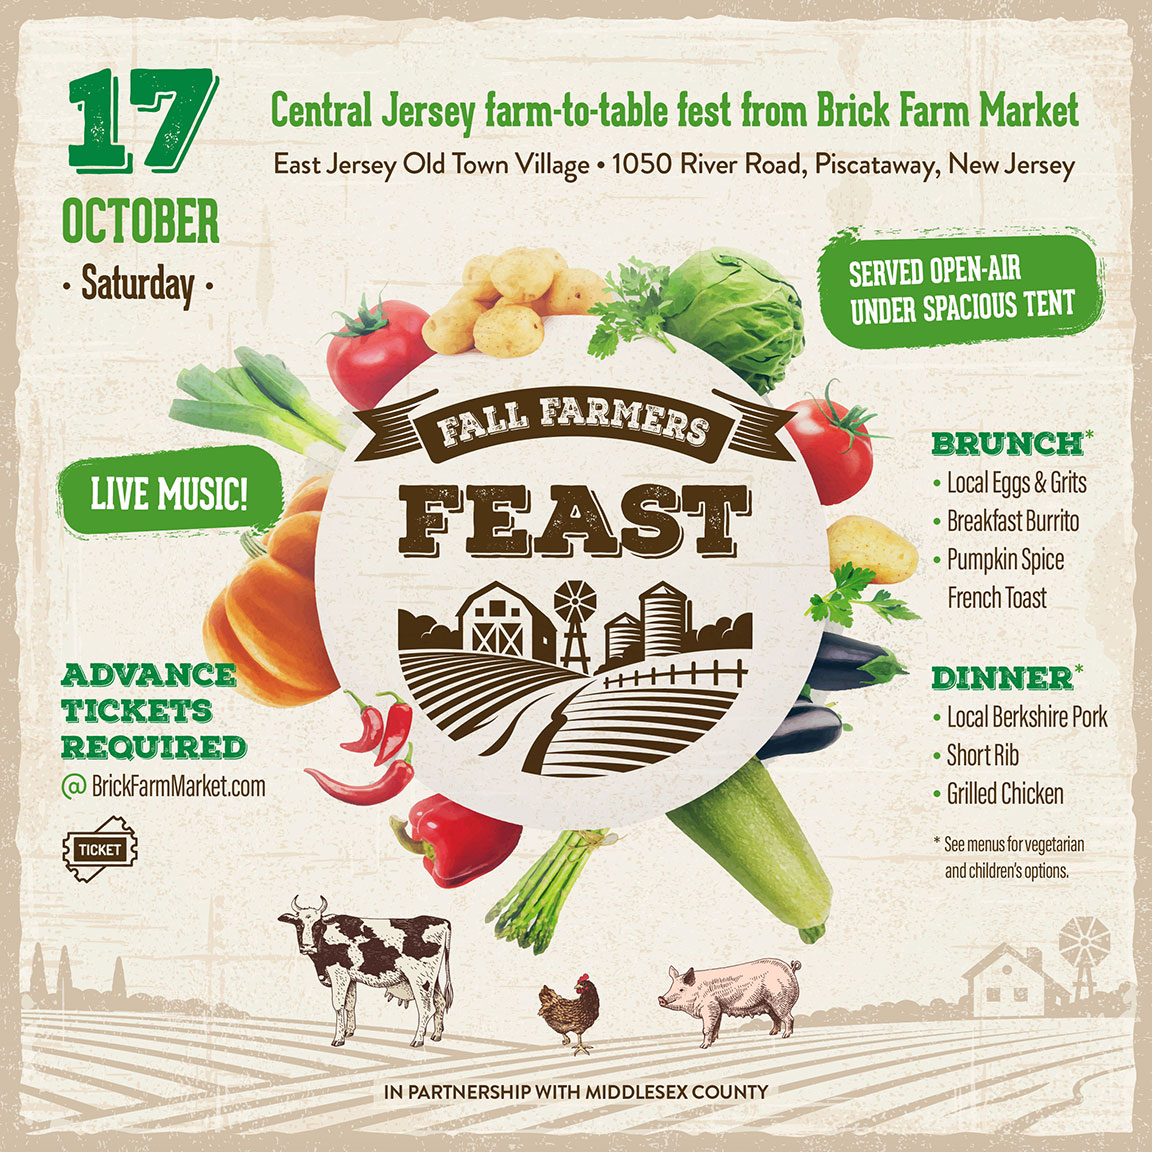 Fall Farmer's Feast Discover Central New Jersey